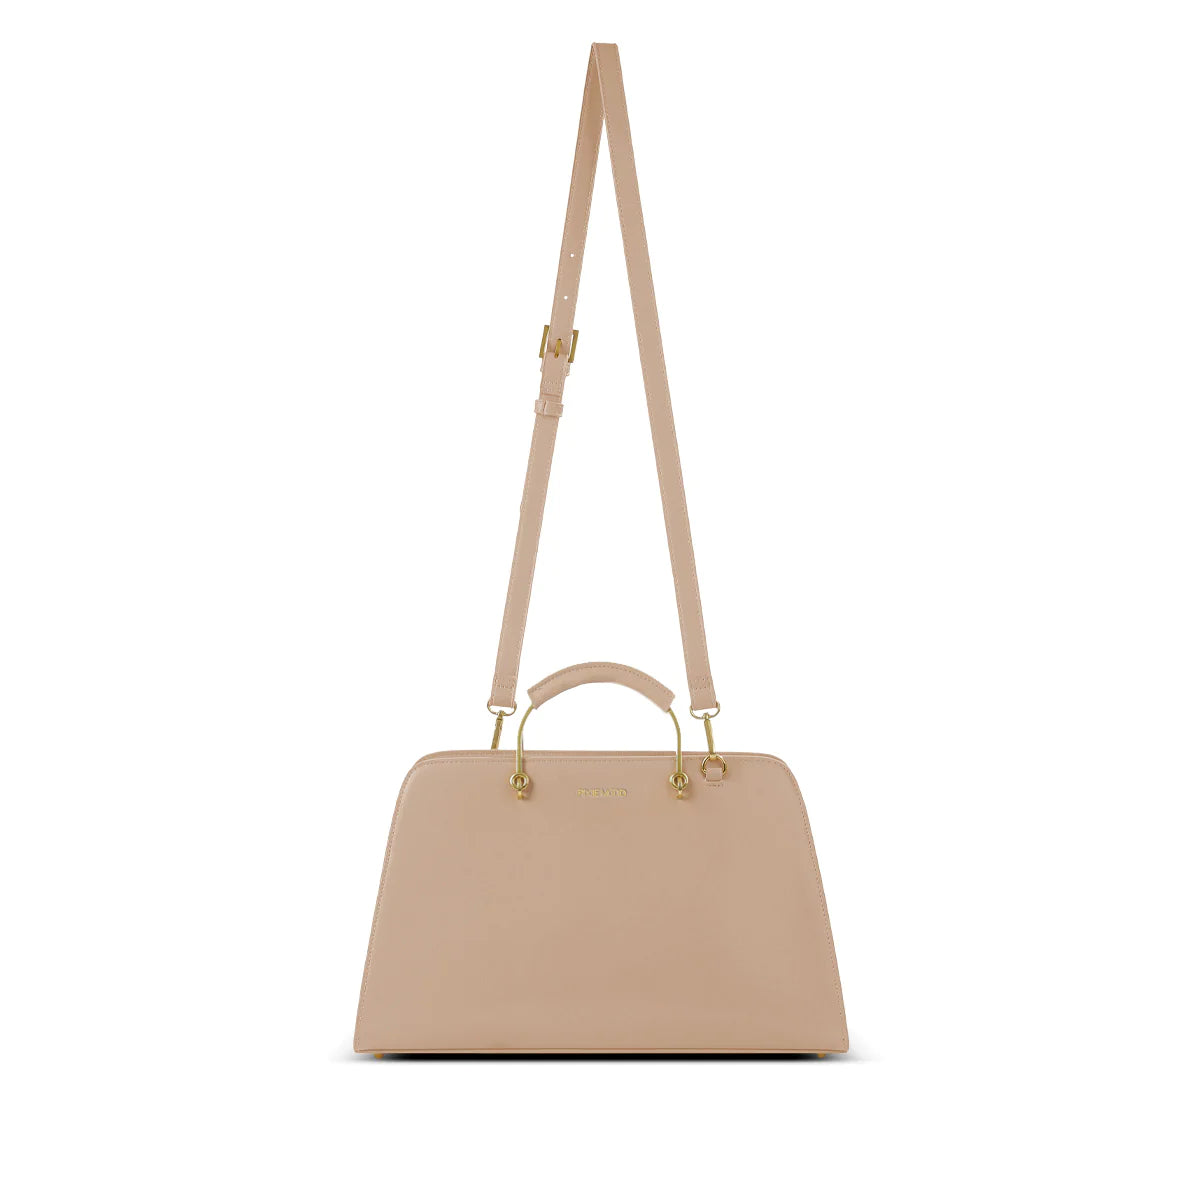 Vegan Leather Tote Bag Apex Ethical Boutique